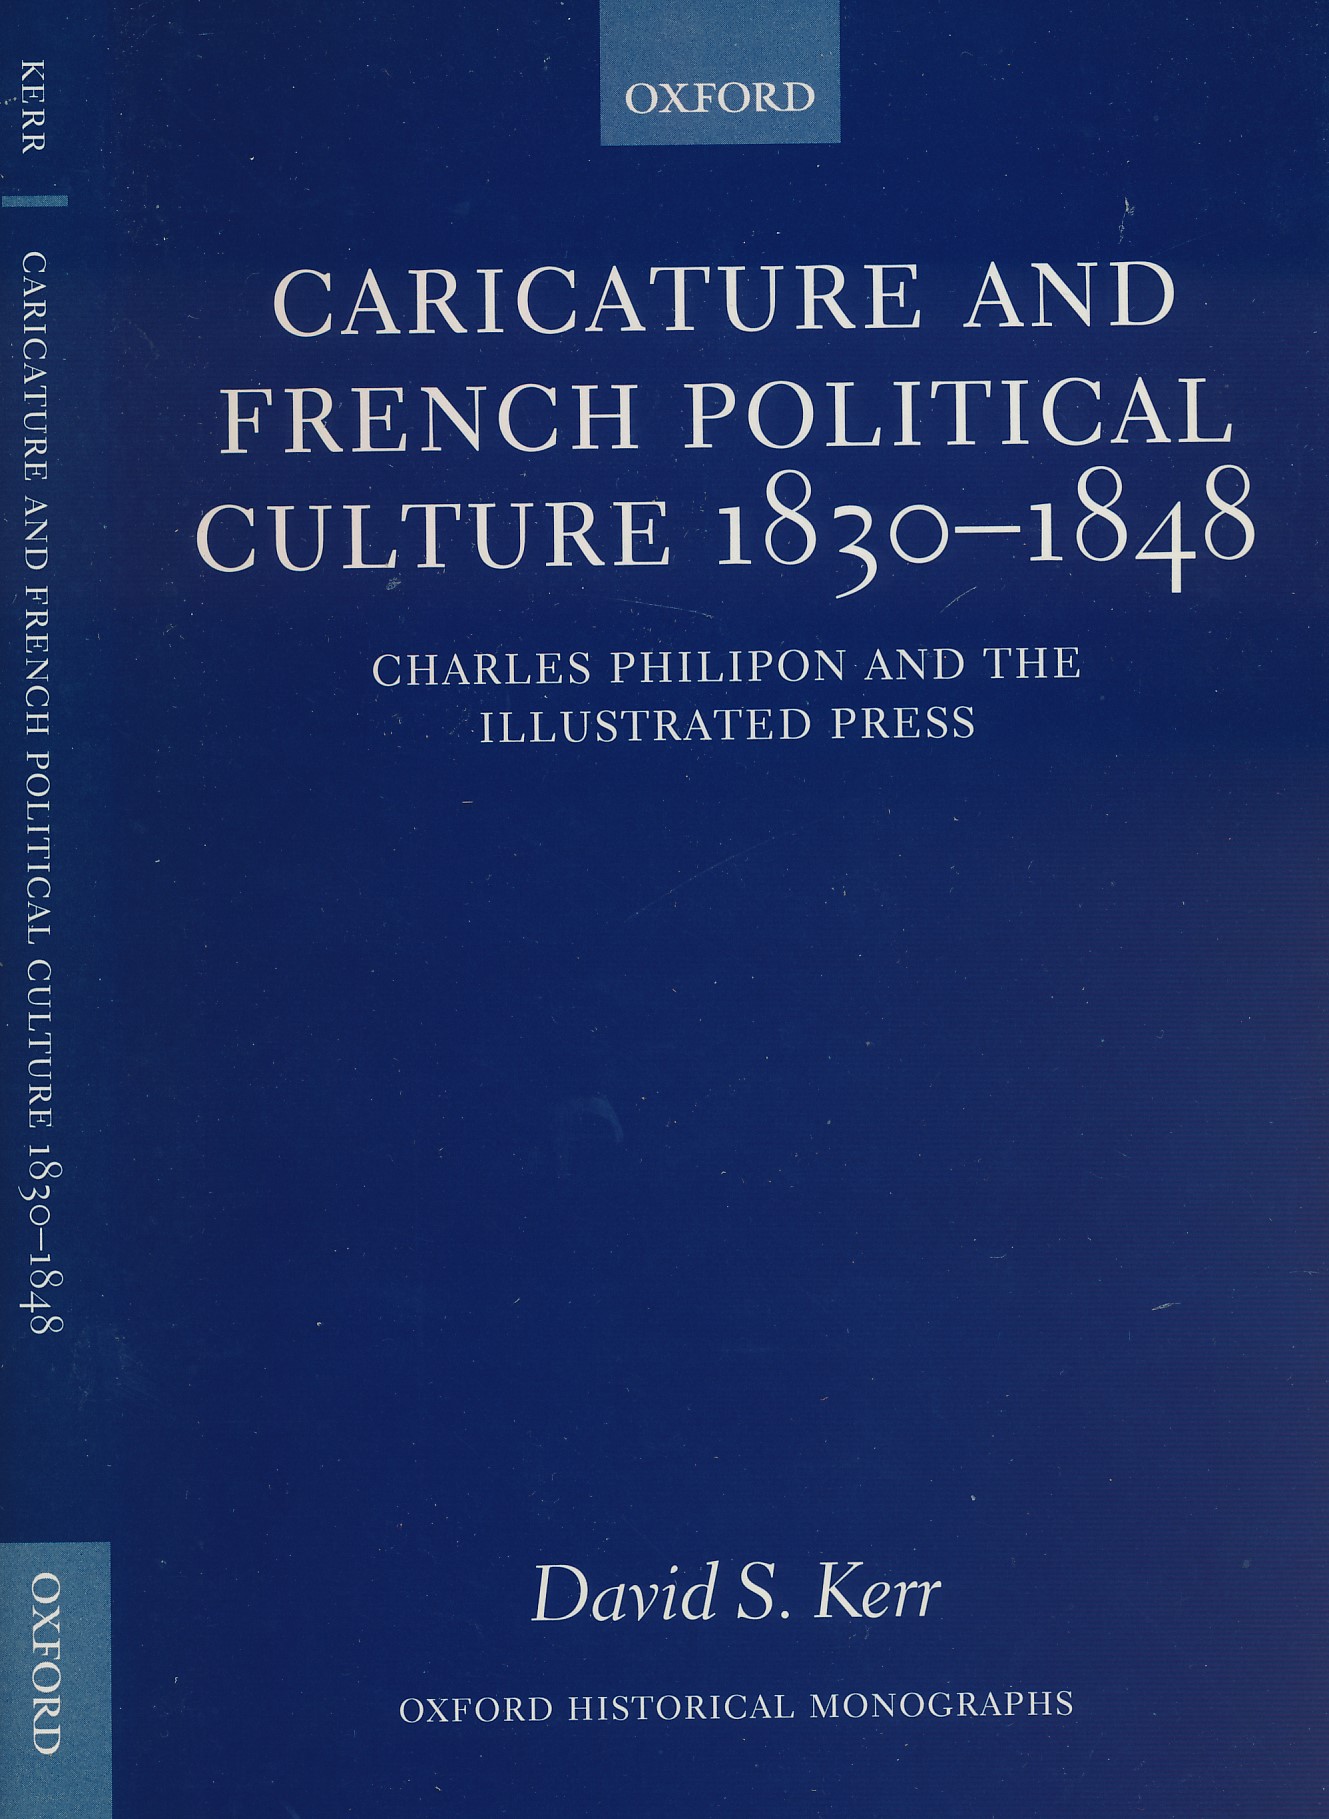 Caricature and French Political Culture 1830-1848. Charles Philipon and the Illustrated Press